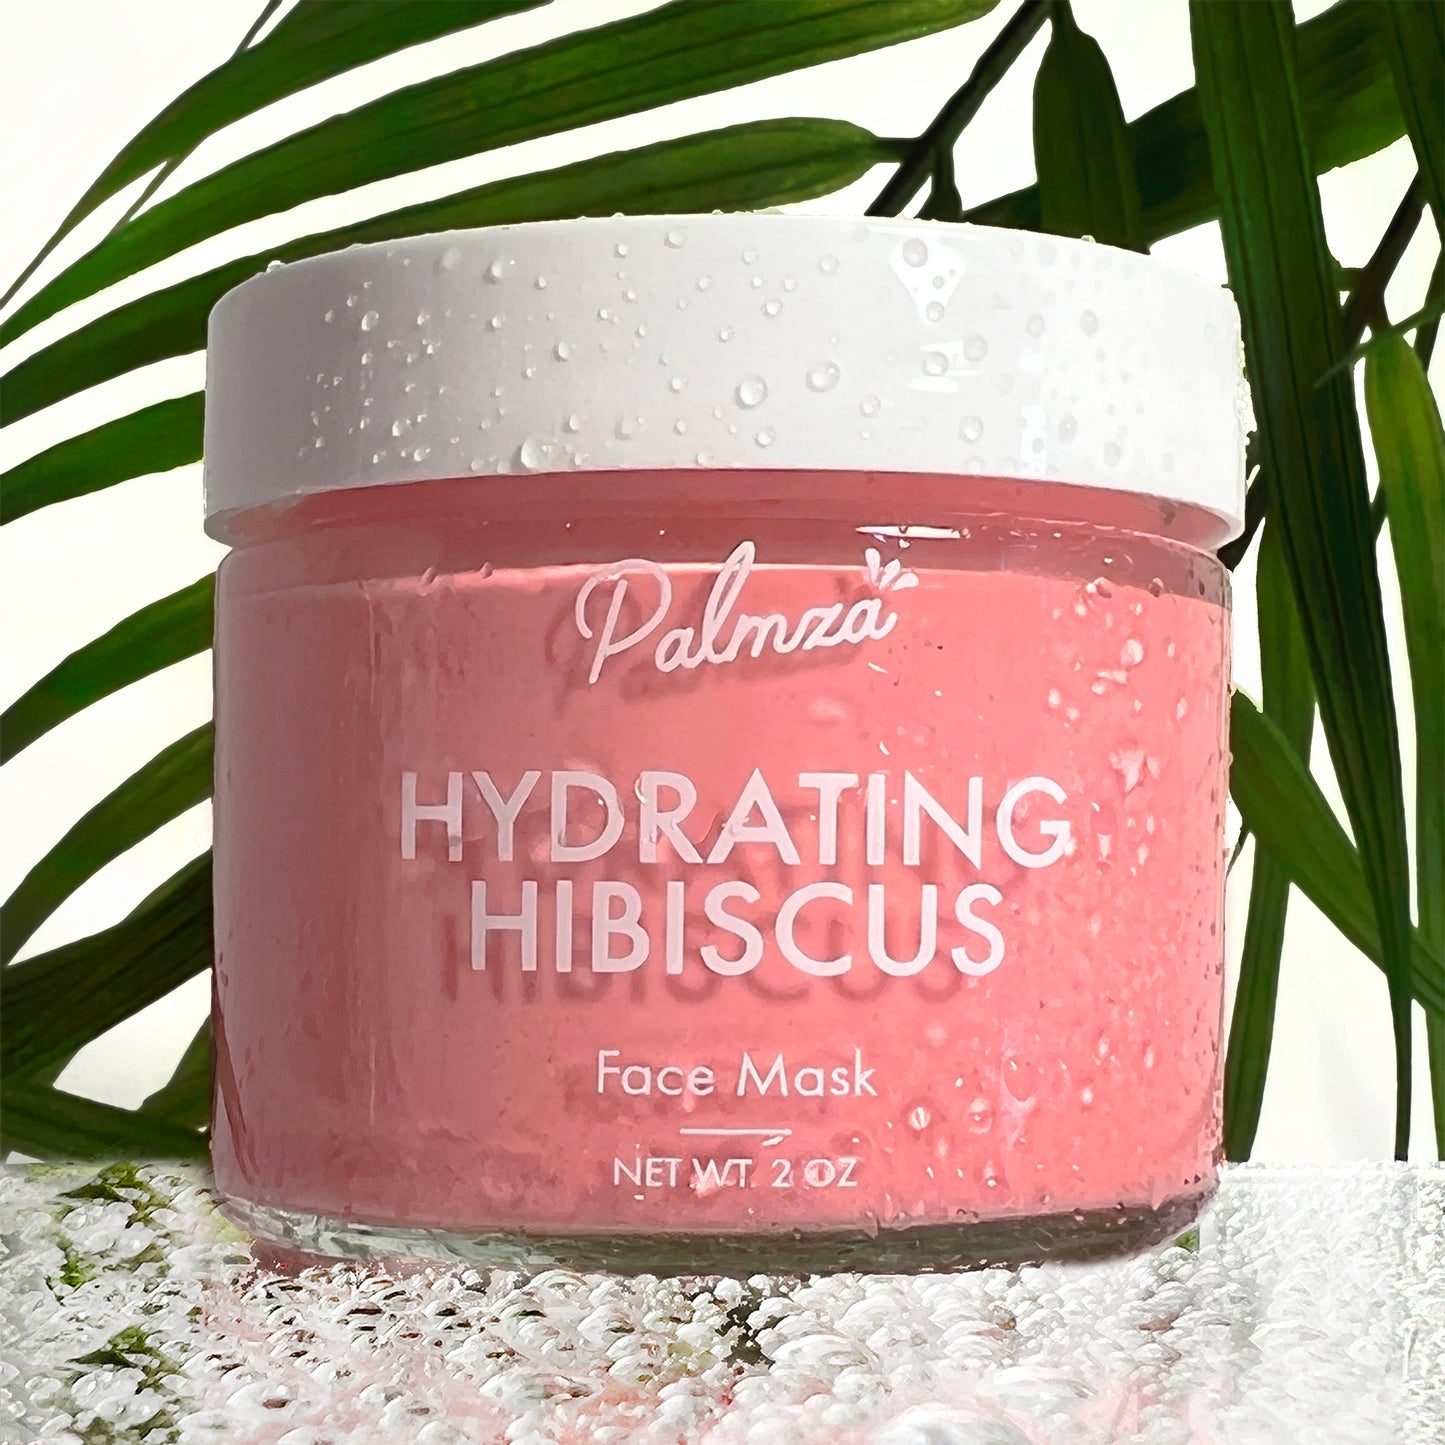 Hydrating Hibiscus Face Mask